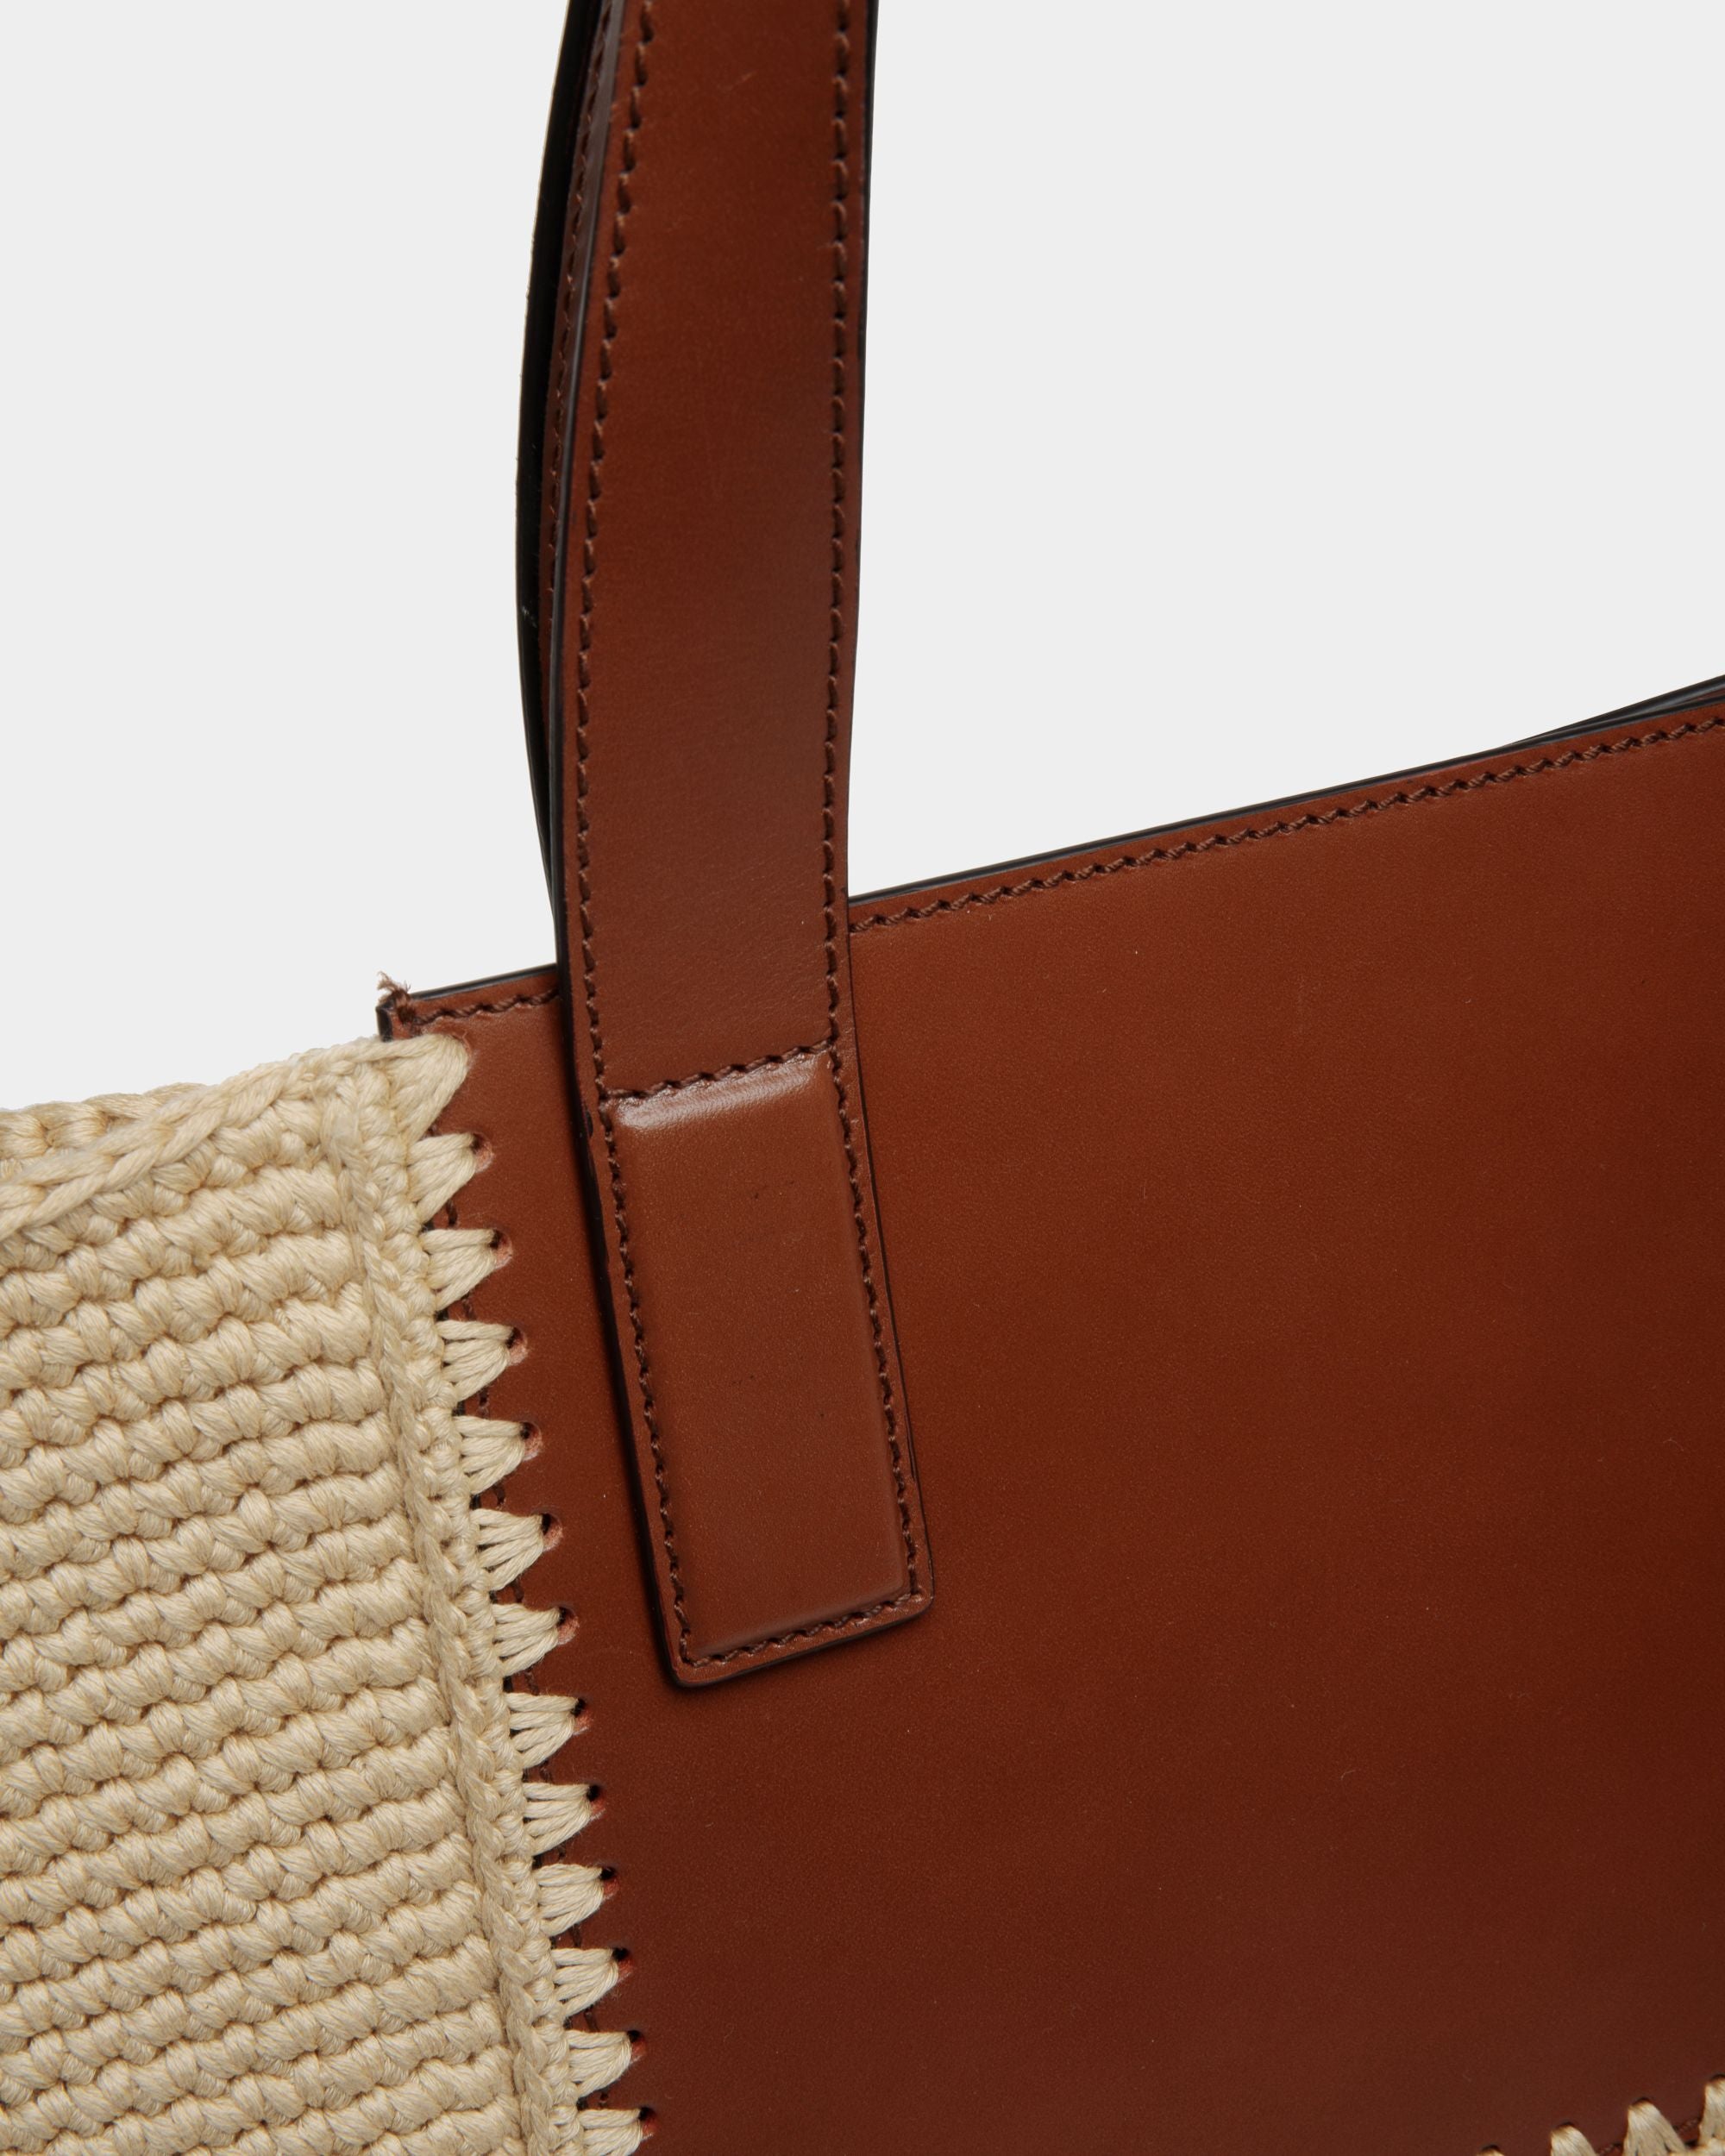 Lace | Women's Tote Bag in Neutral Cotton and Leather | Bally | Still Life Detail